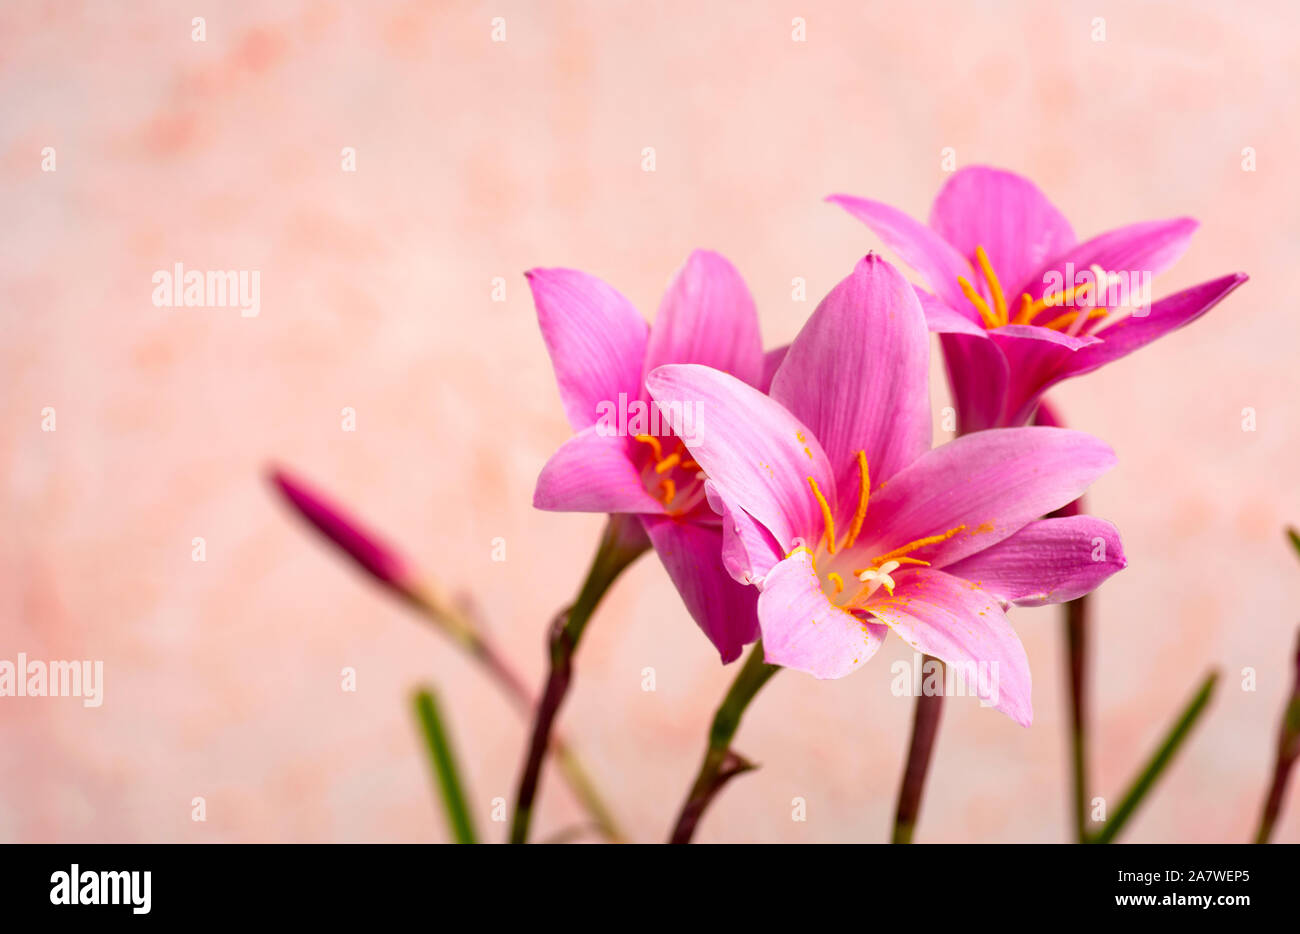 Pink lily flowers in bloom against pastel background Stock Photo